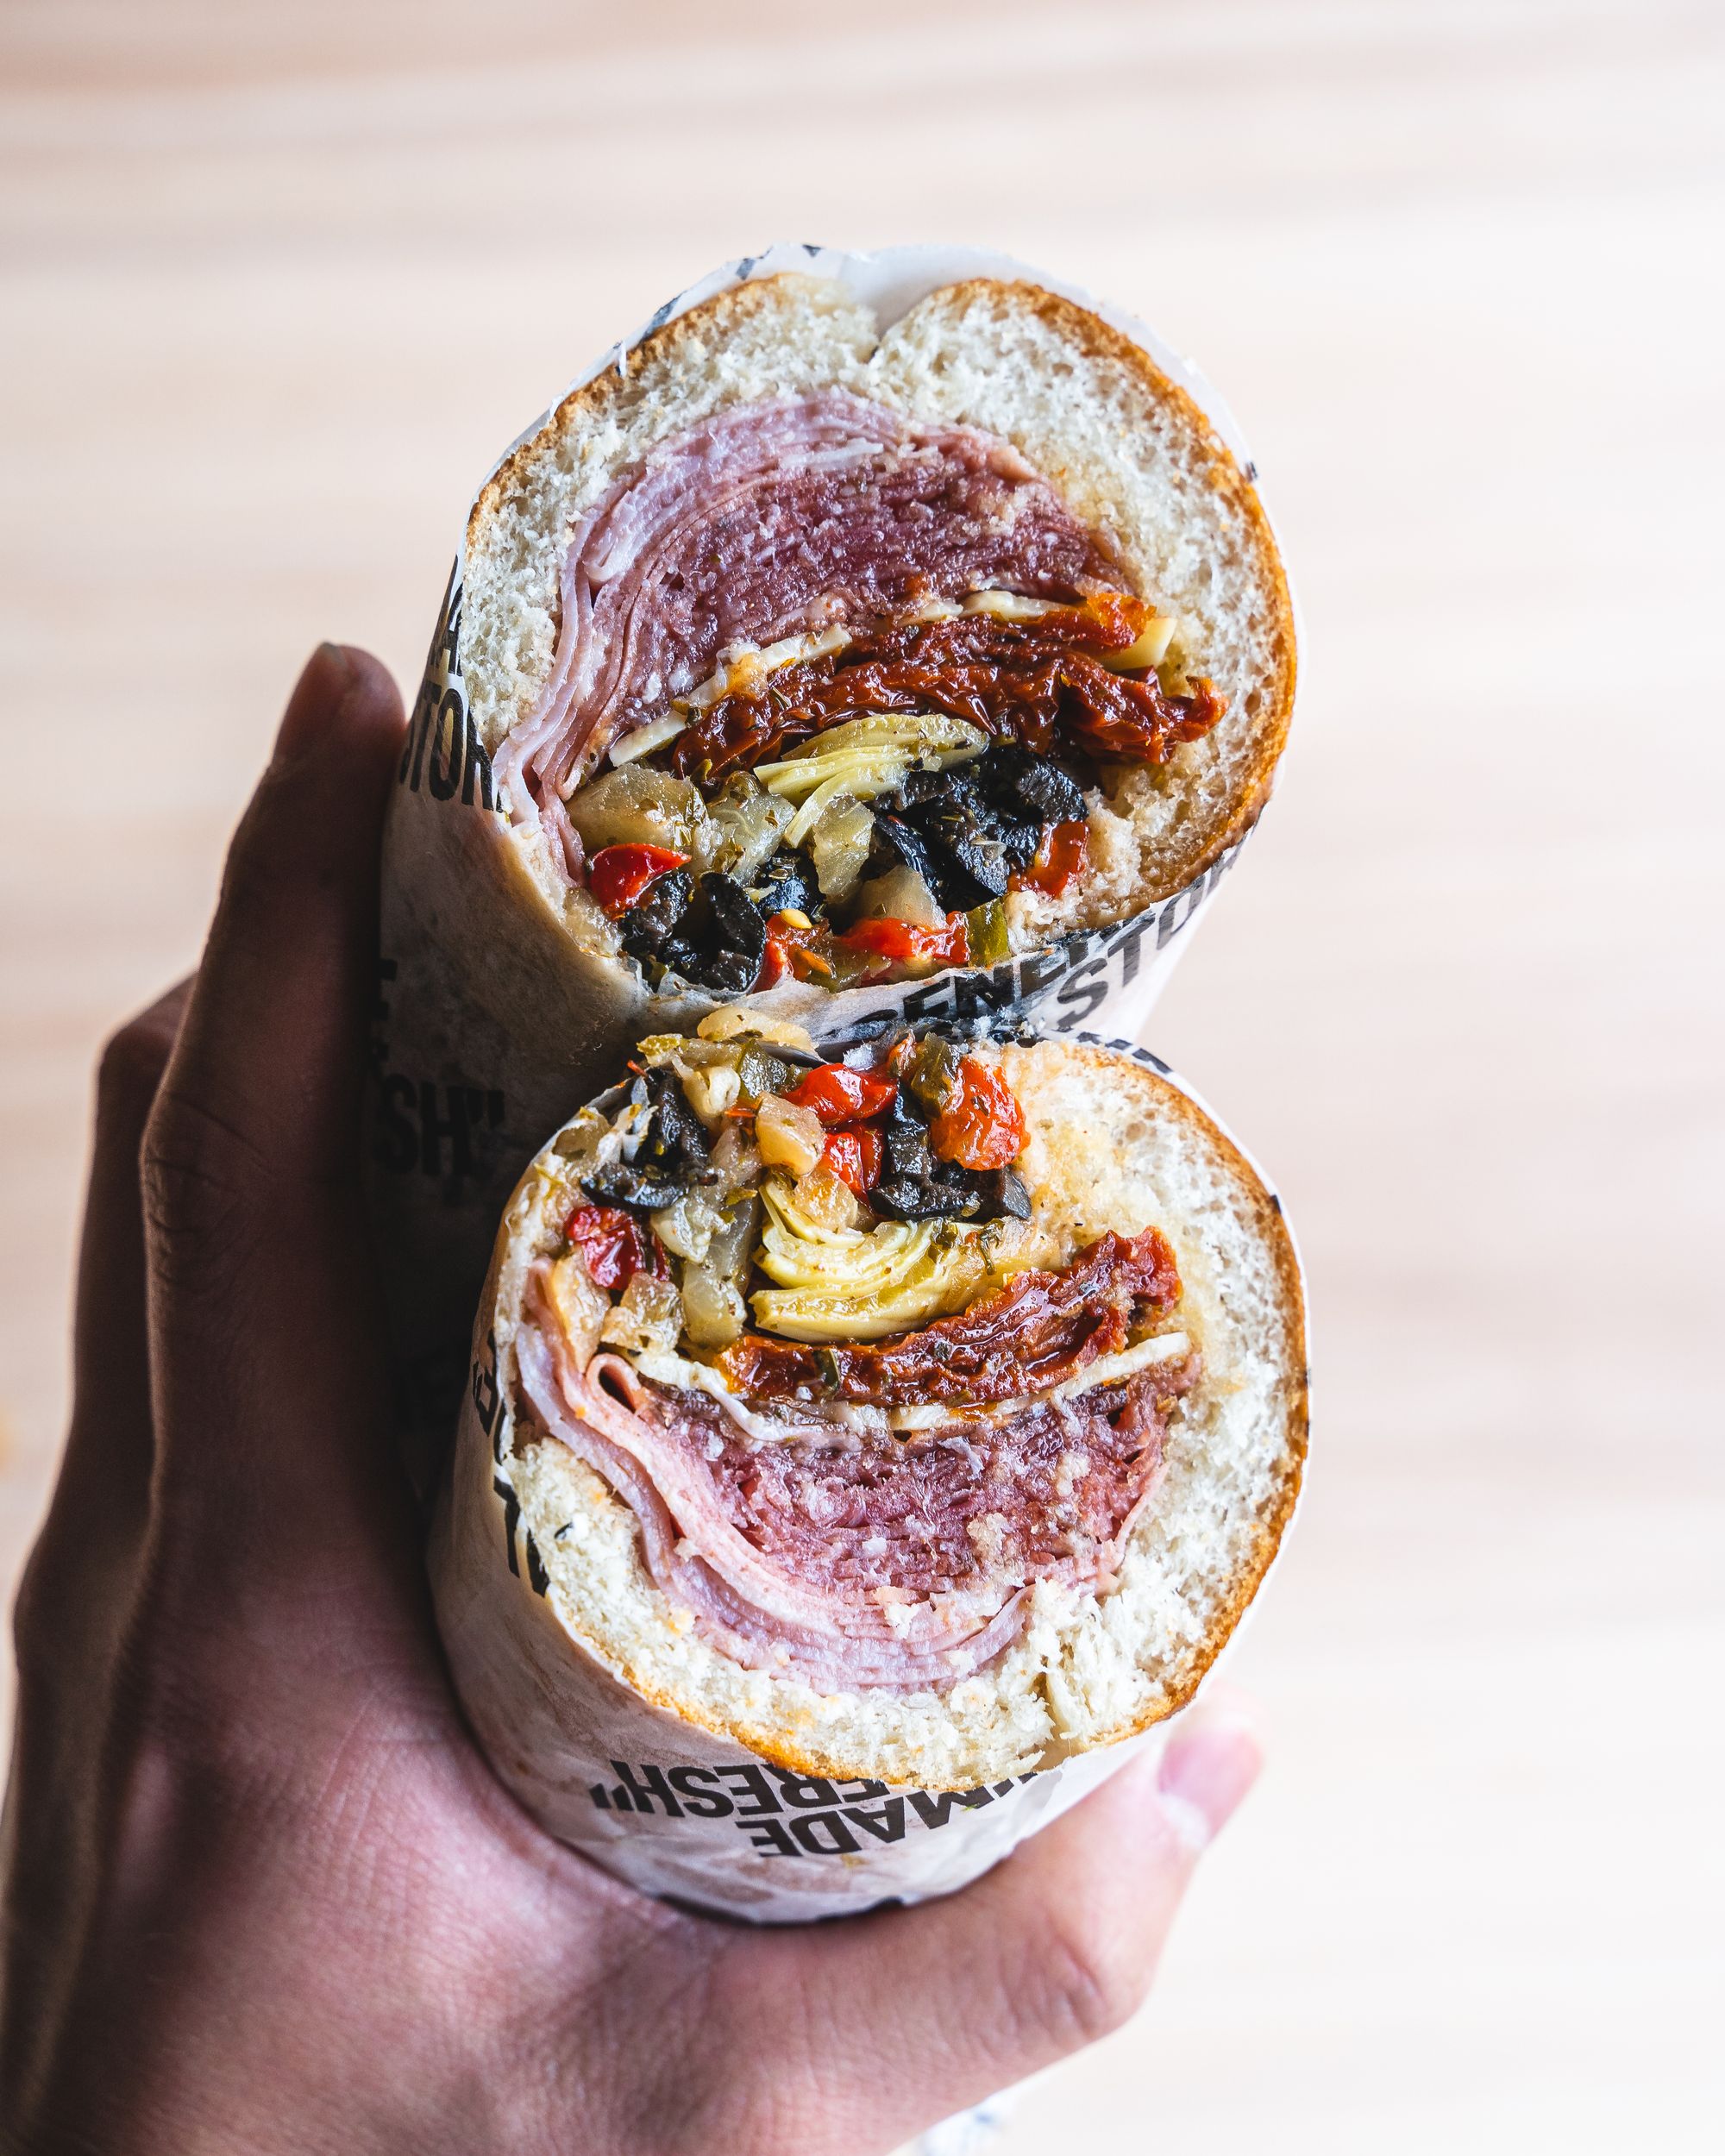 Hand holding two sandwich rolls showing a cross section of Italian cured meats and antipasto